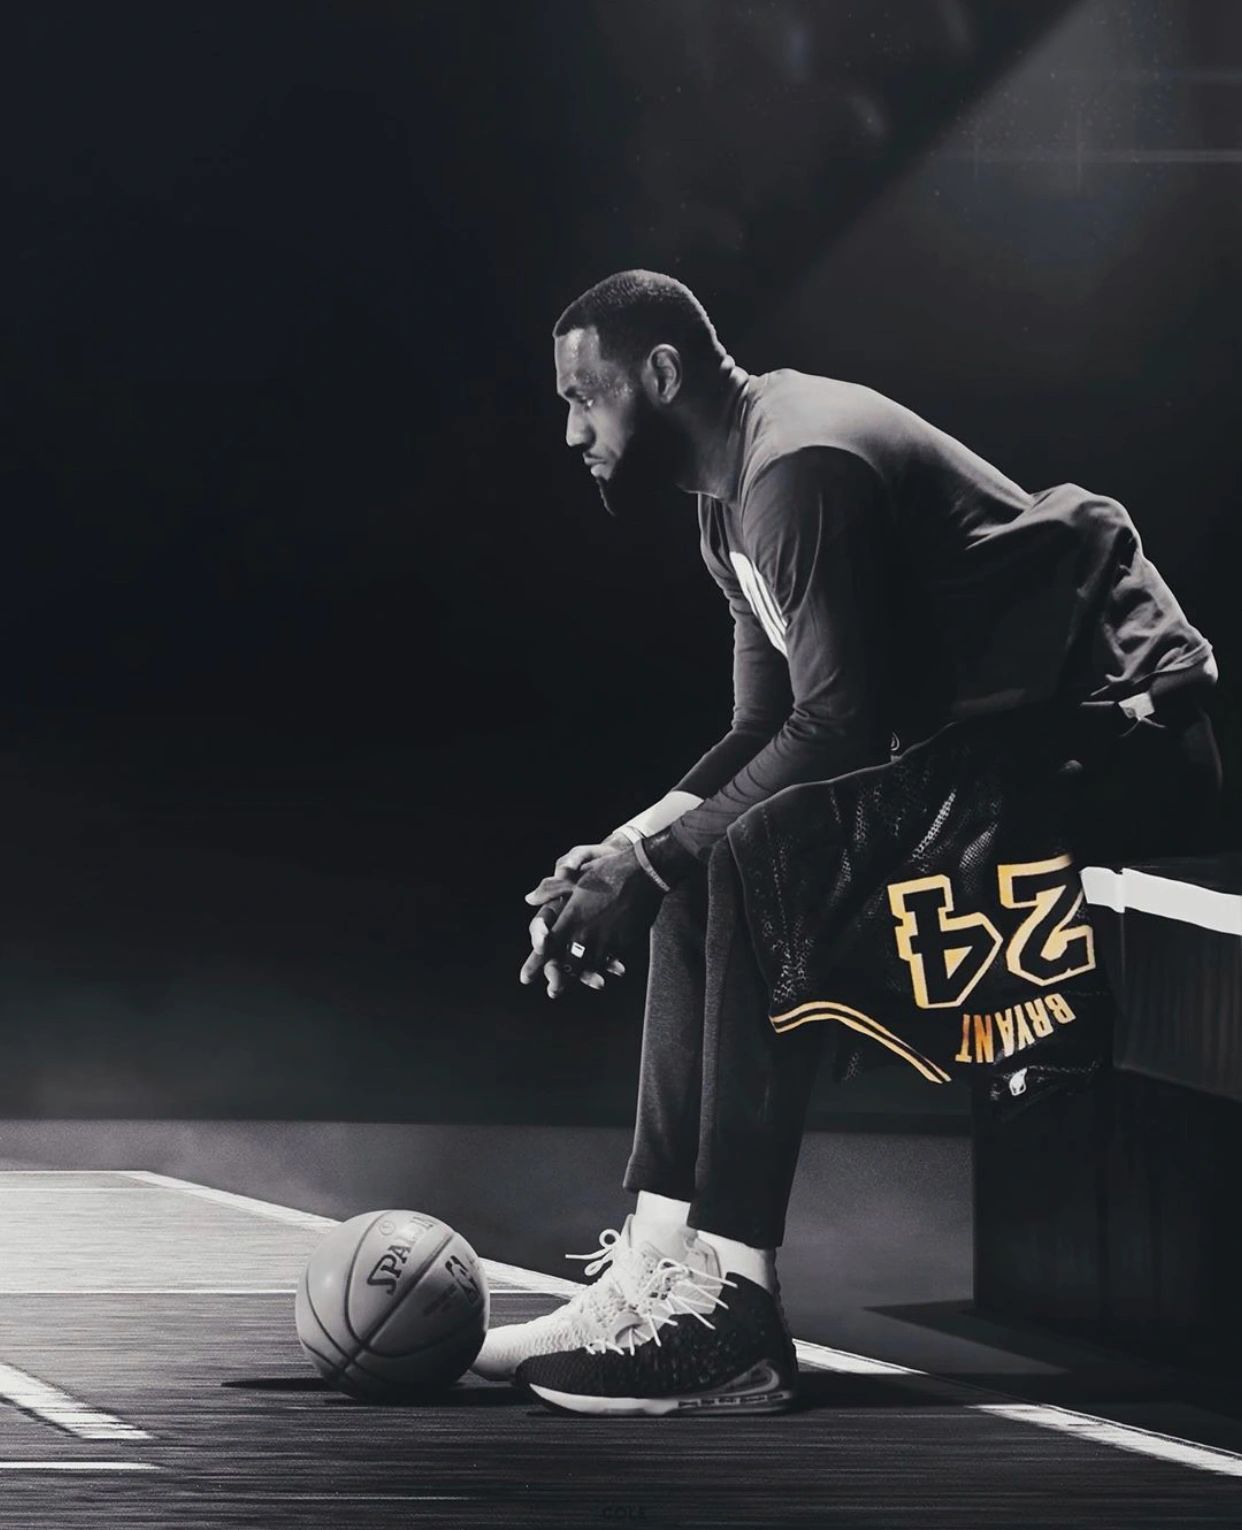 The King's reign continues, LeBron will be back